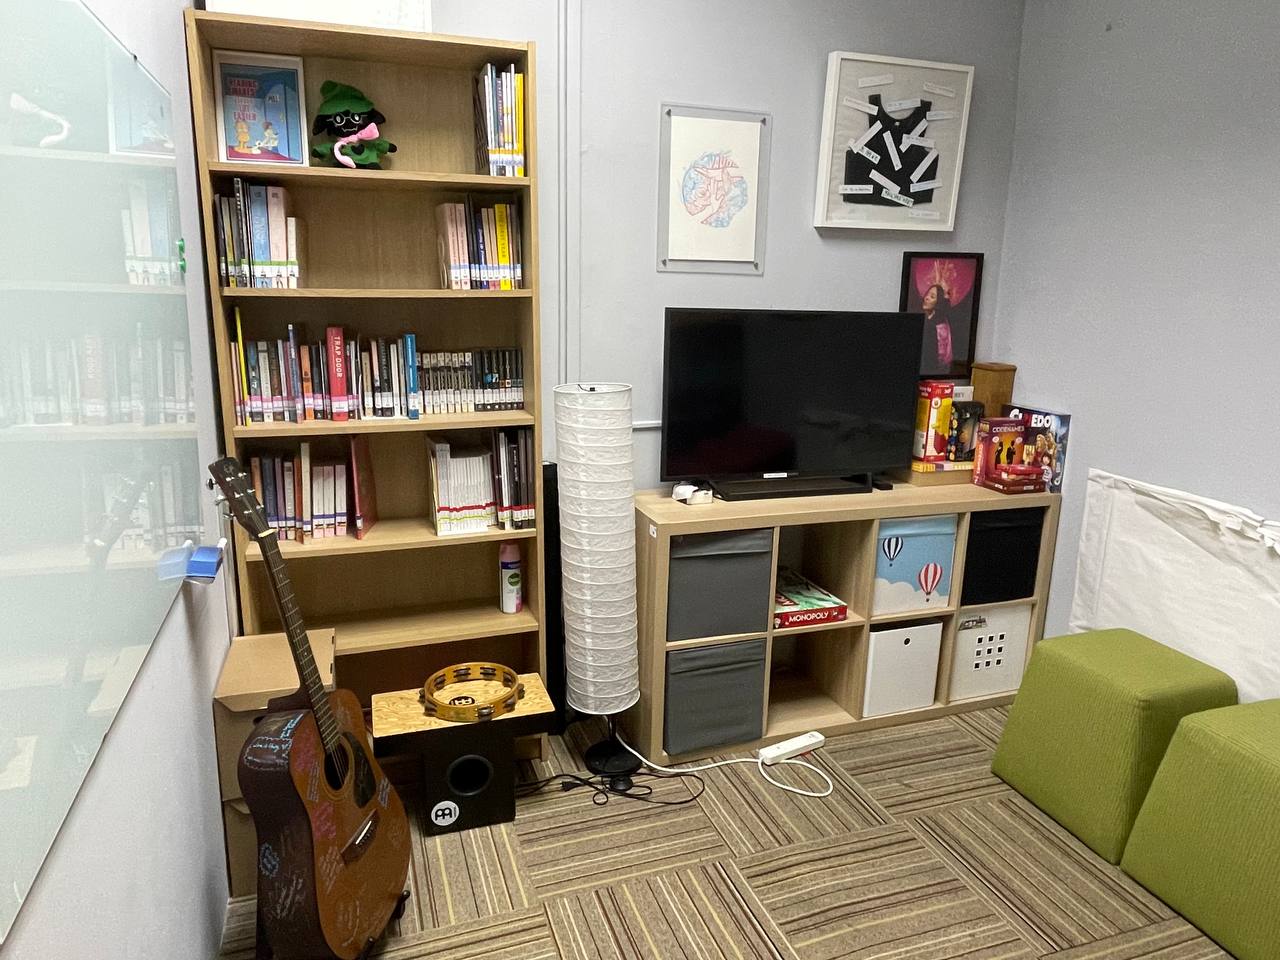 A carpeted room with a bookshelf on the left, a guitar sitting on the floor, a television, and some board games.